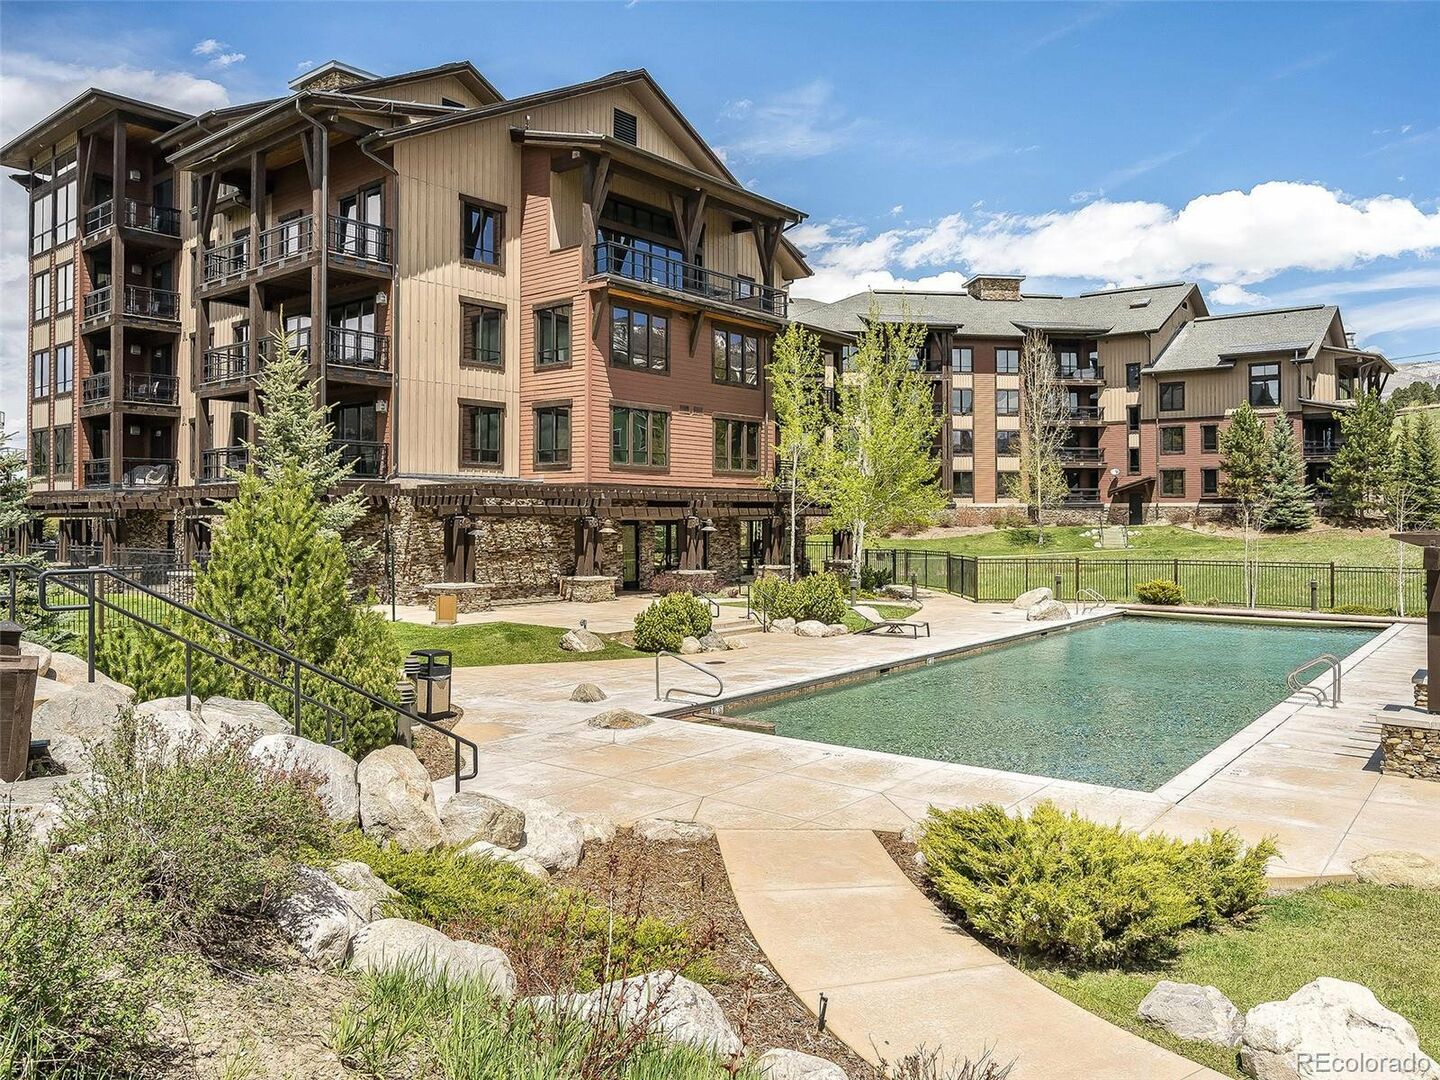 Enjoy an outdoor heated pool at this 2 bedroom/2 bath condo in Trailhead Lodge!